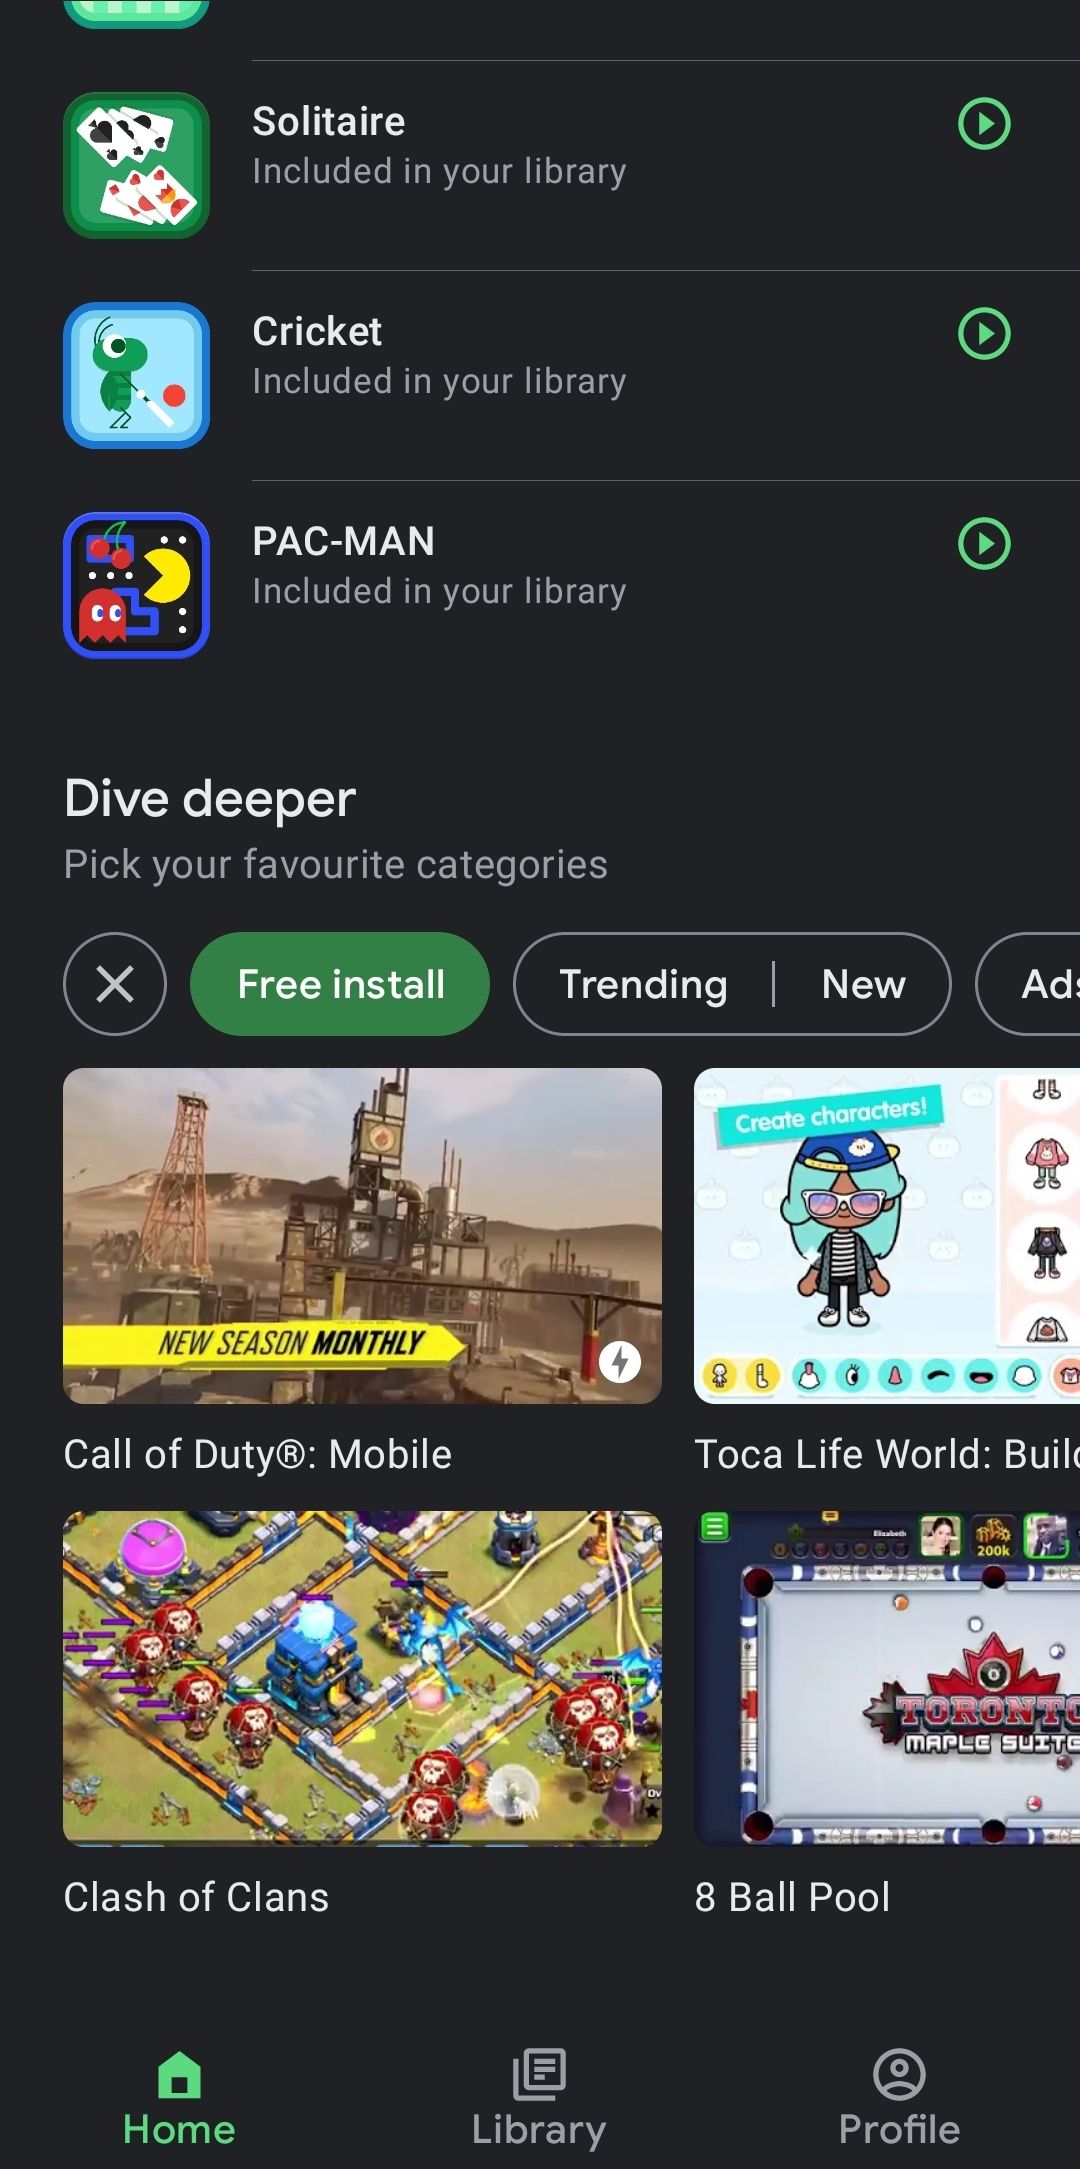 Google Play Games' dive deeper search shows categories to filter suggested games